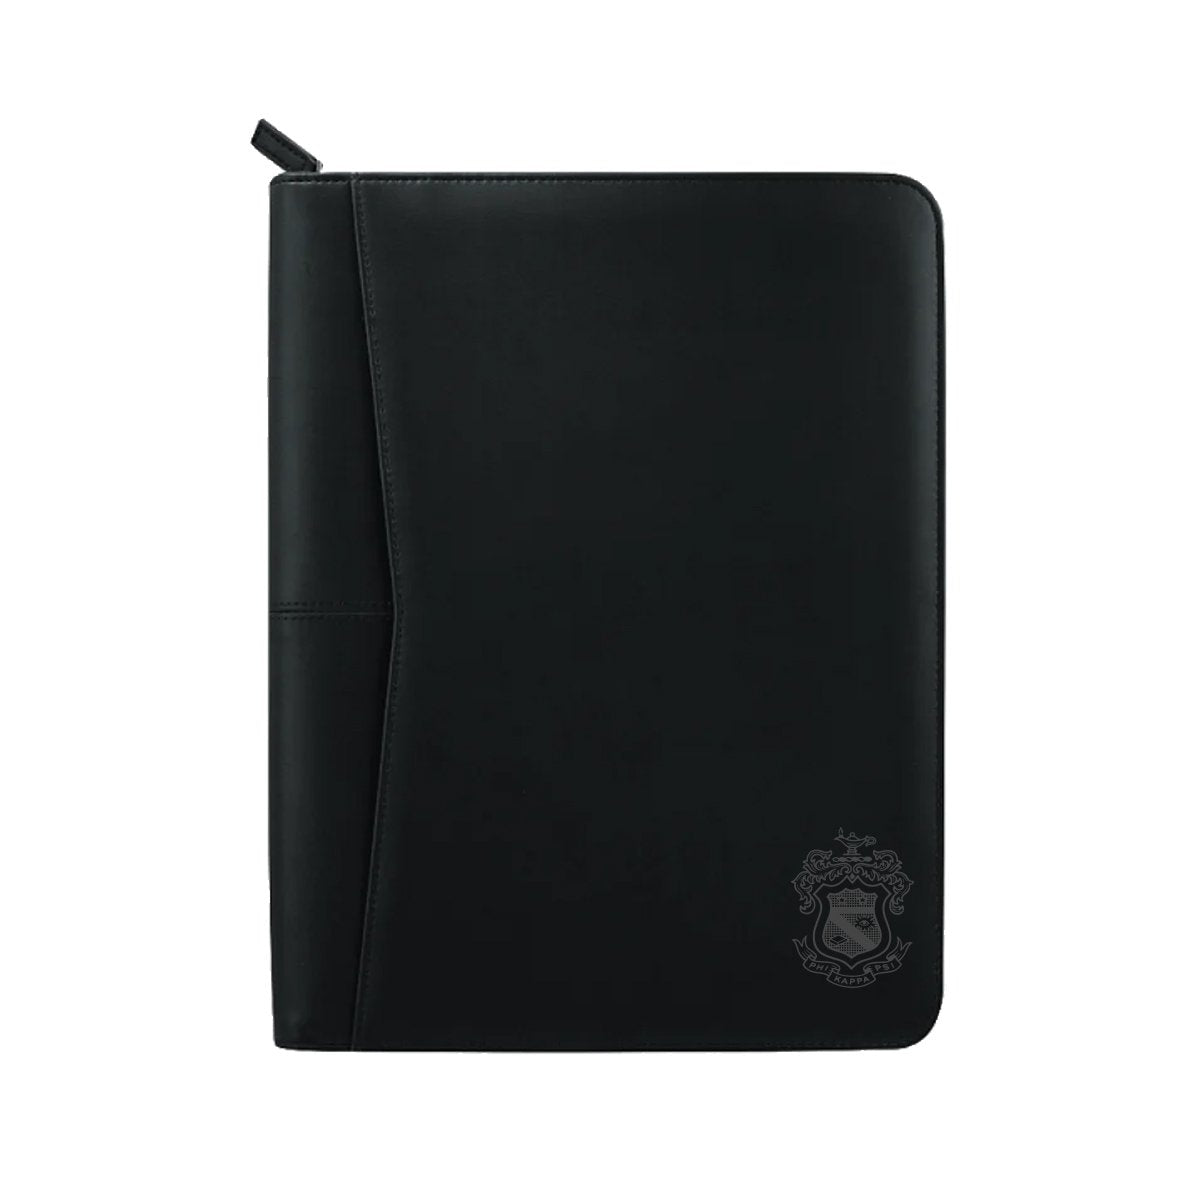 Phi Psi Zippered Crest Padfolio | Phi Kappa Psi | Office products > Padfolios